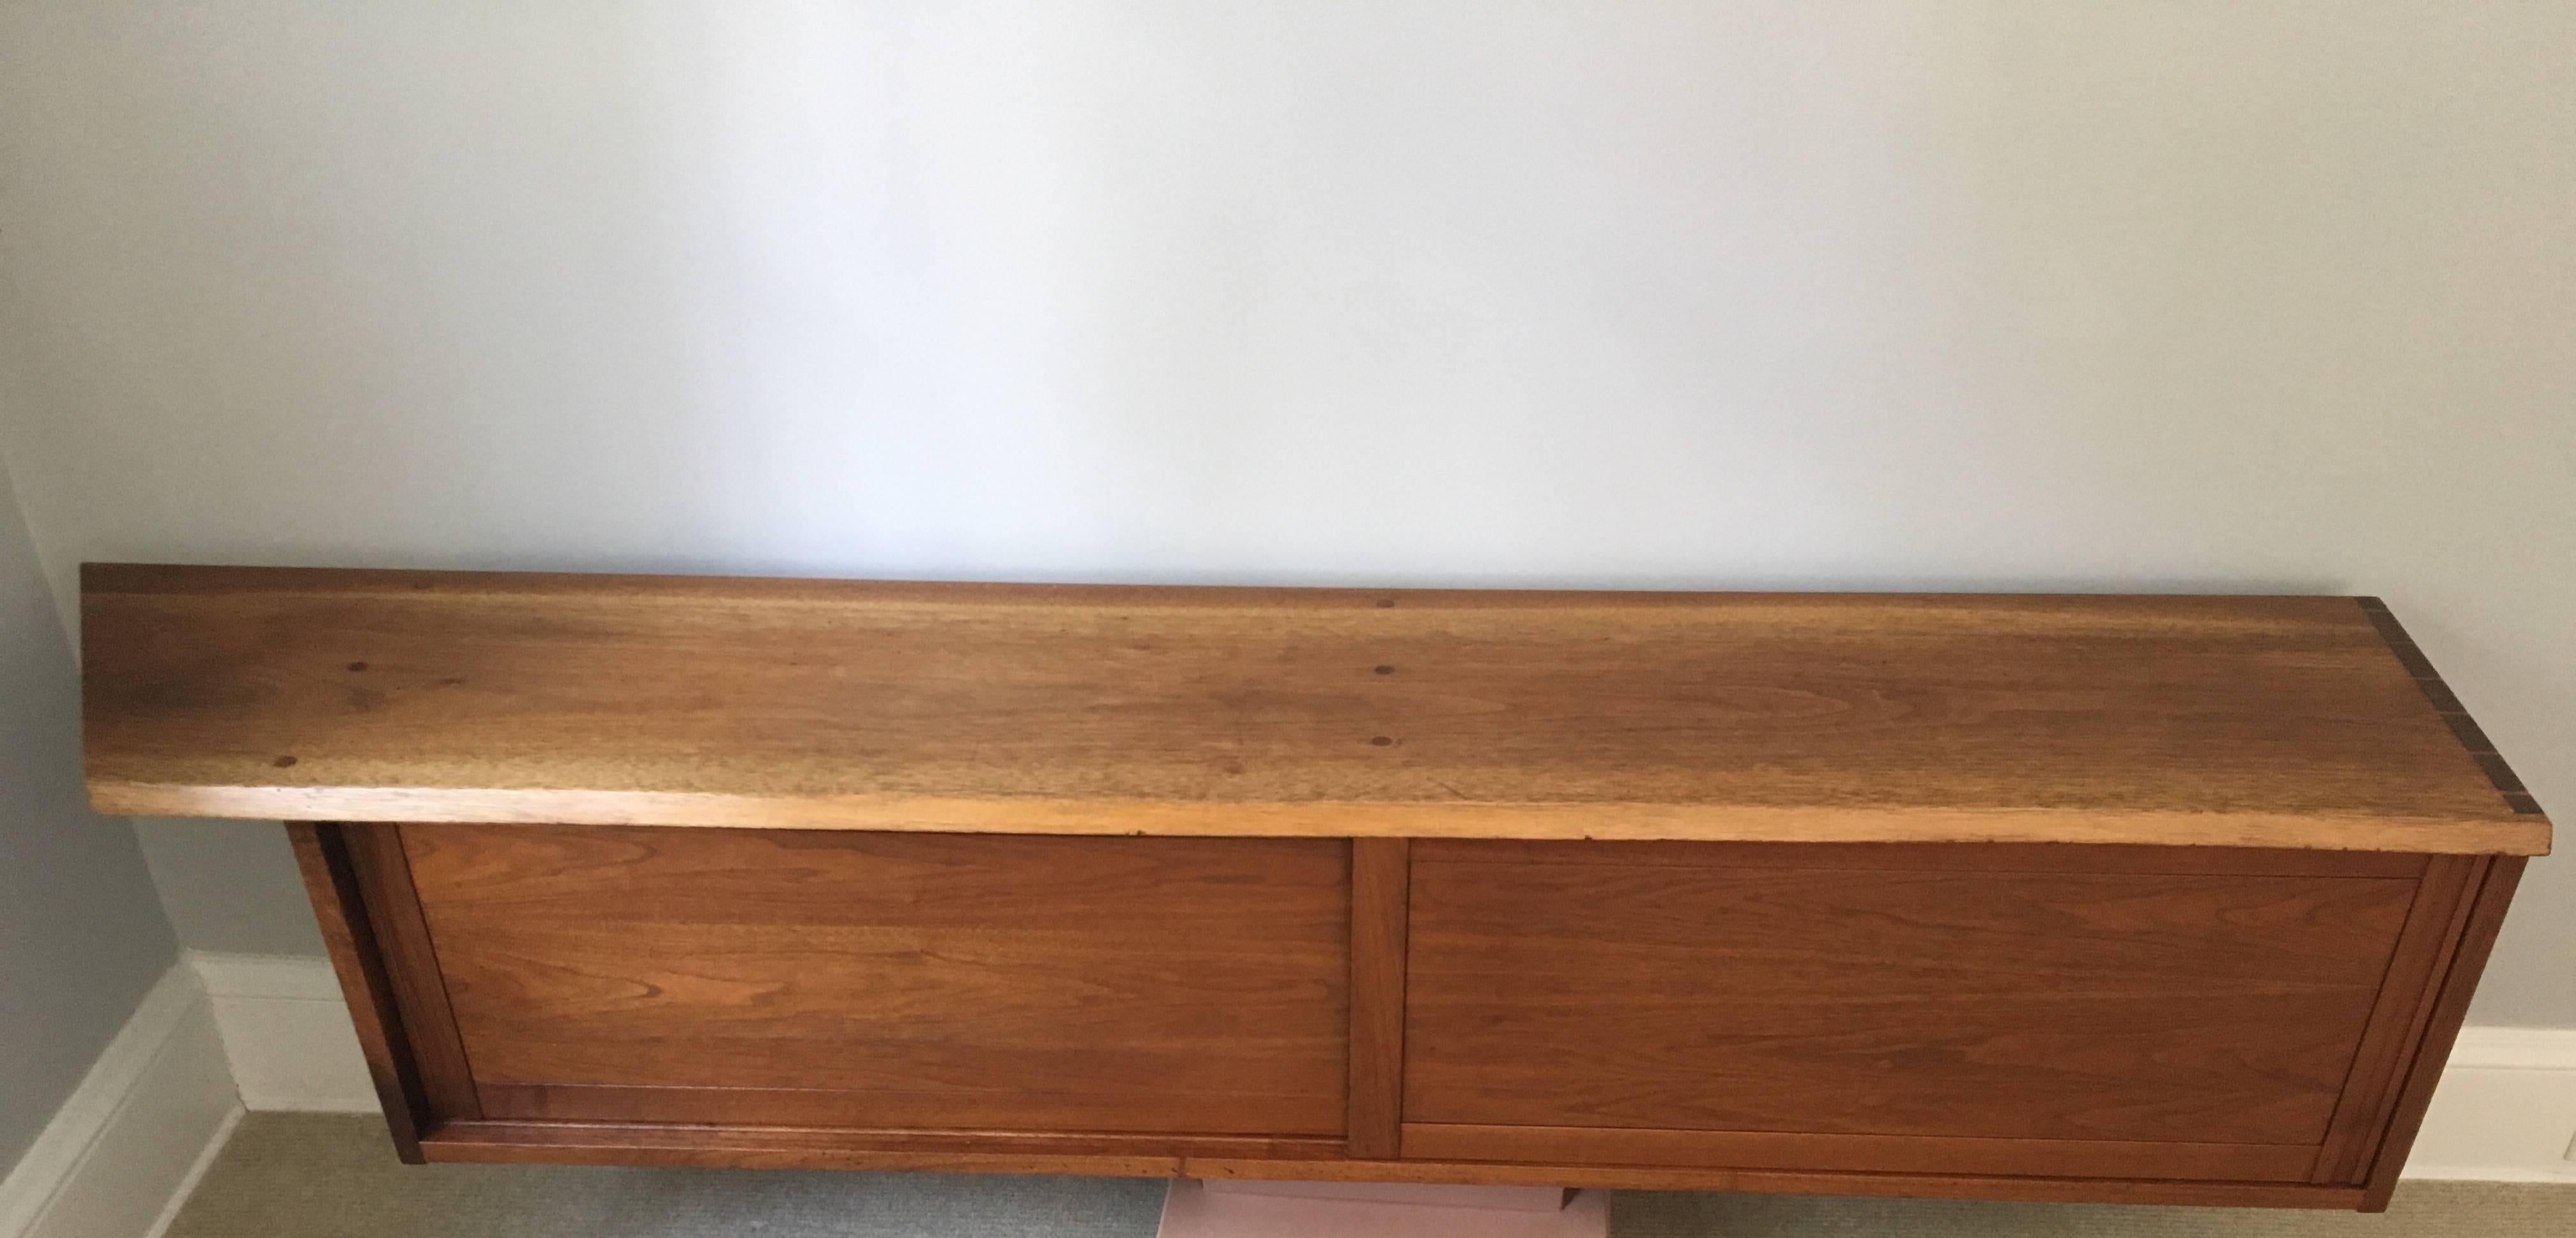 Exceptional walnut, wall handing console by George Nakashima, 1965. Two sliding doors and a shelf on the left side. Beautiful live edge and craftsmanship. Great apartment size.